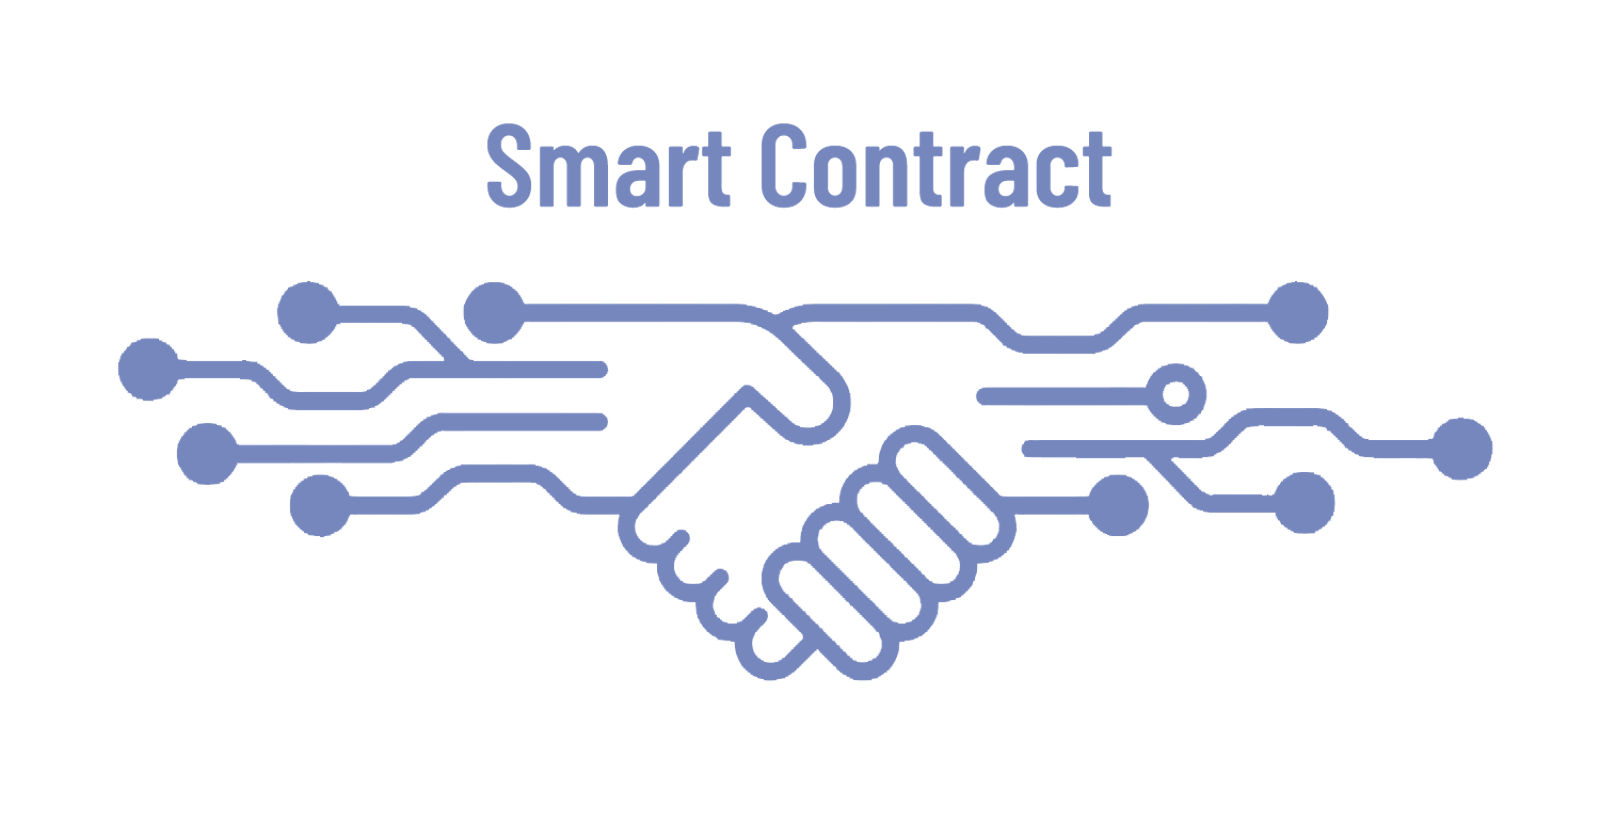 How to create your first frontend to interact with smart contract